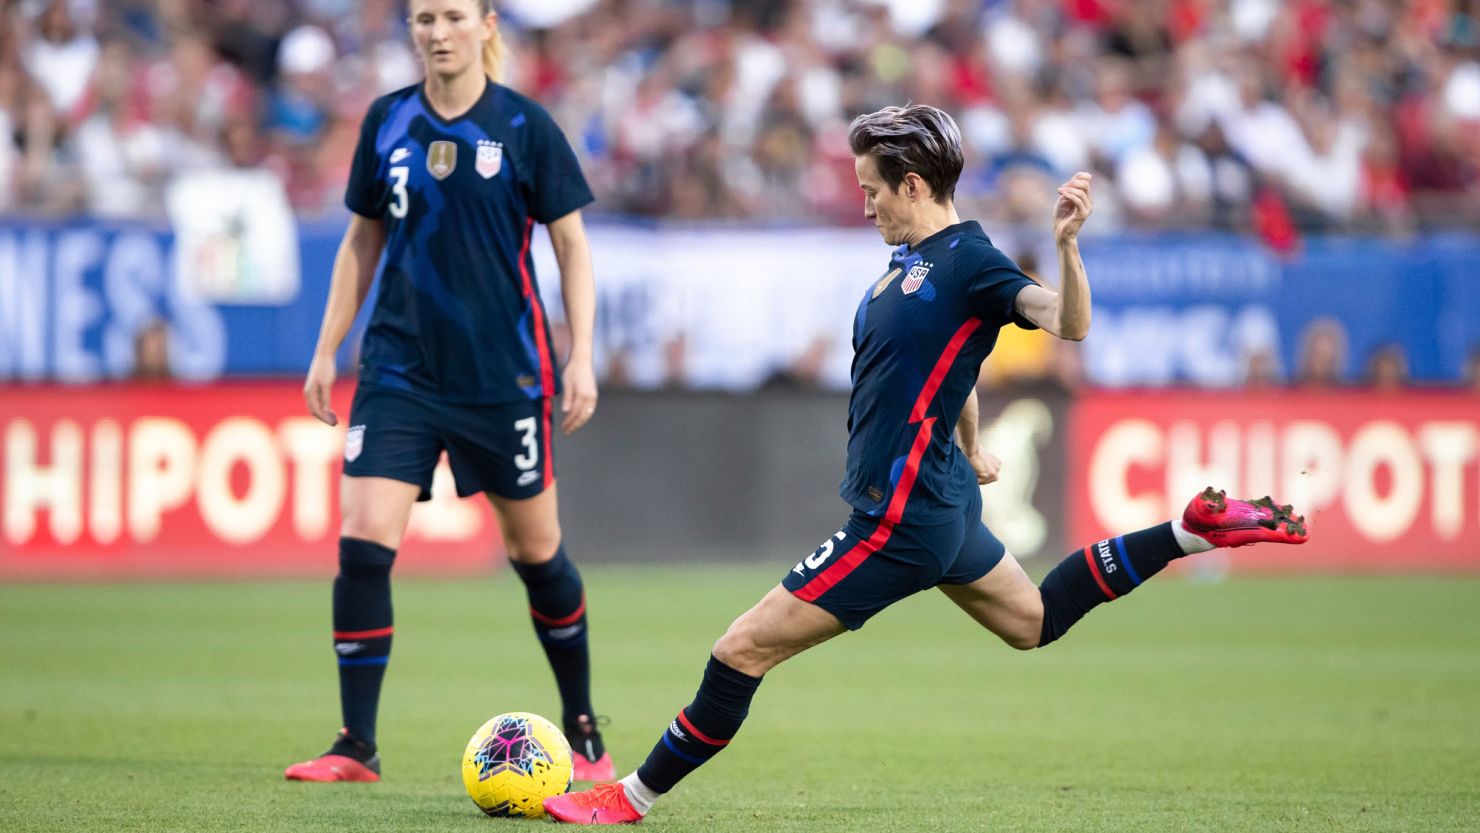 USA midfielder Megan Rapinoe scores a goal off a free kick during the SheBelieves Cup soccer game between the United States and Japan on March 11.